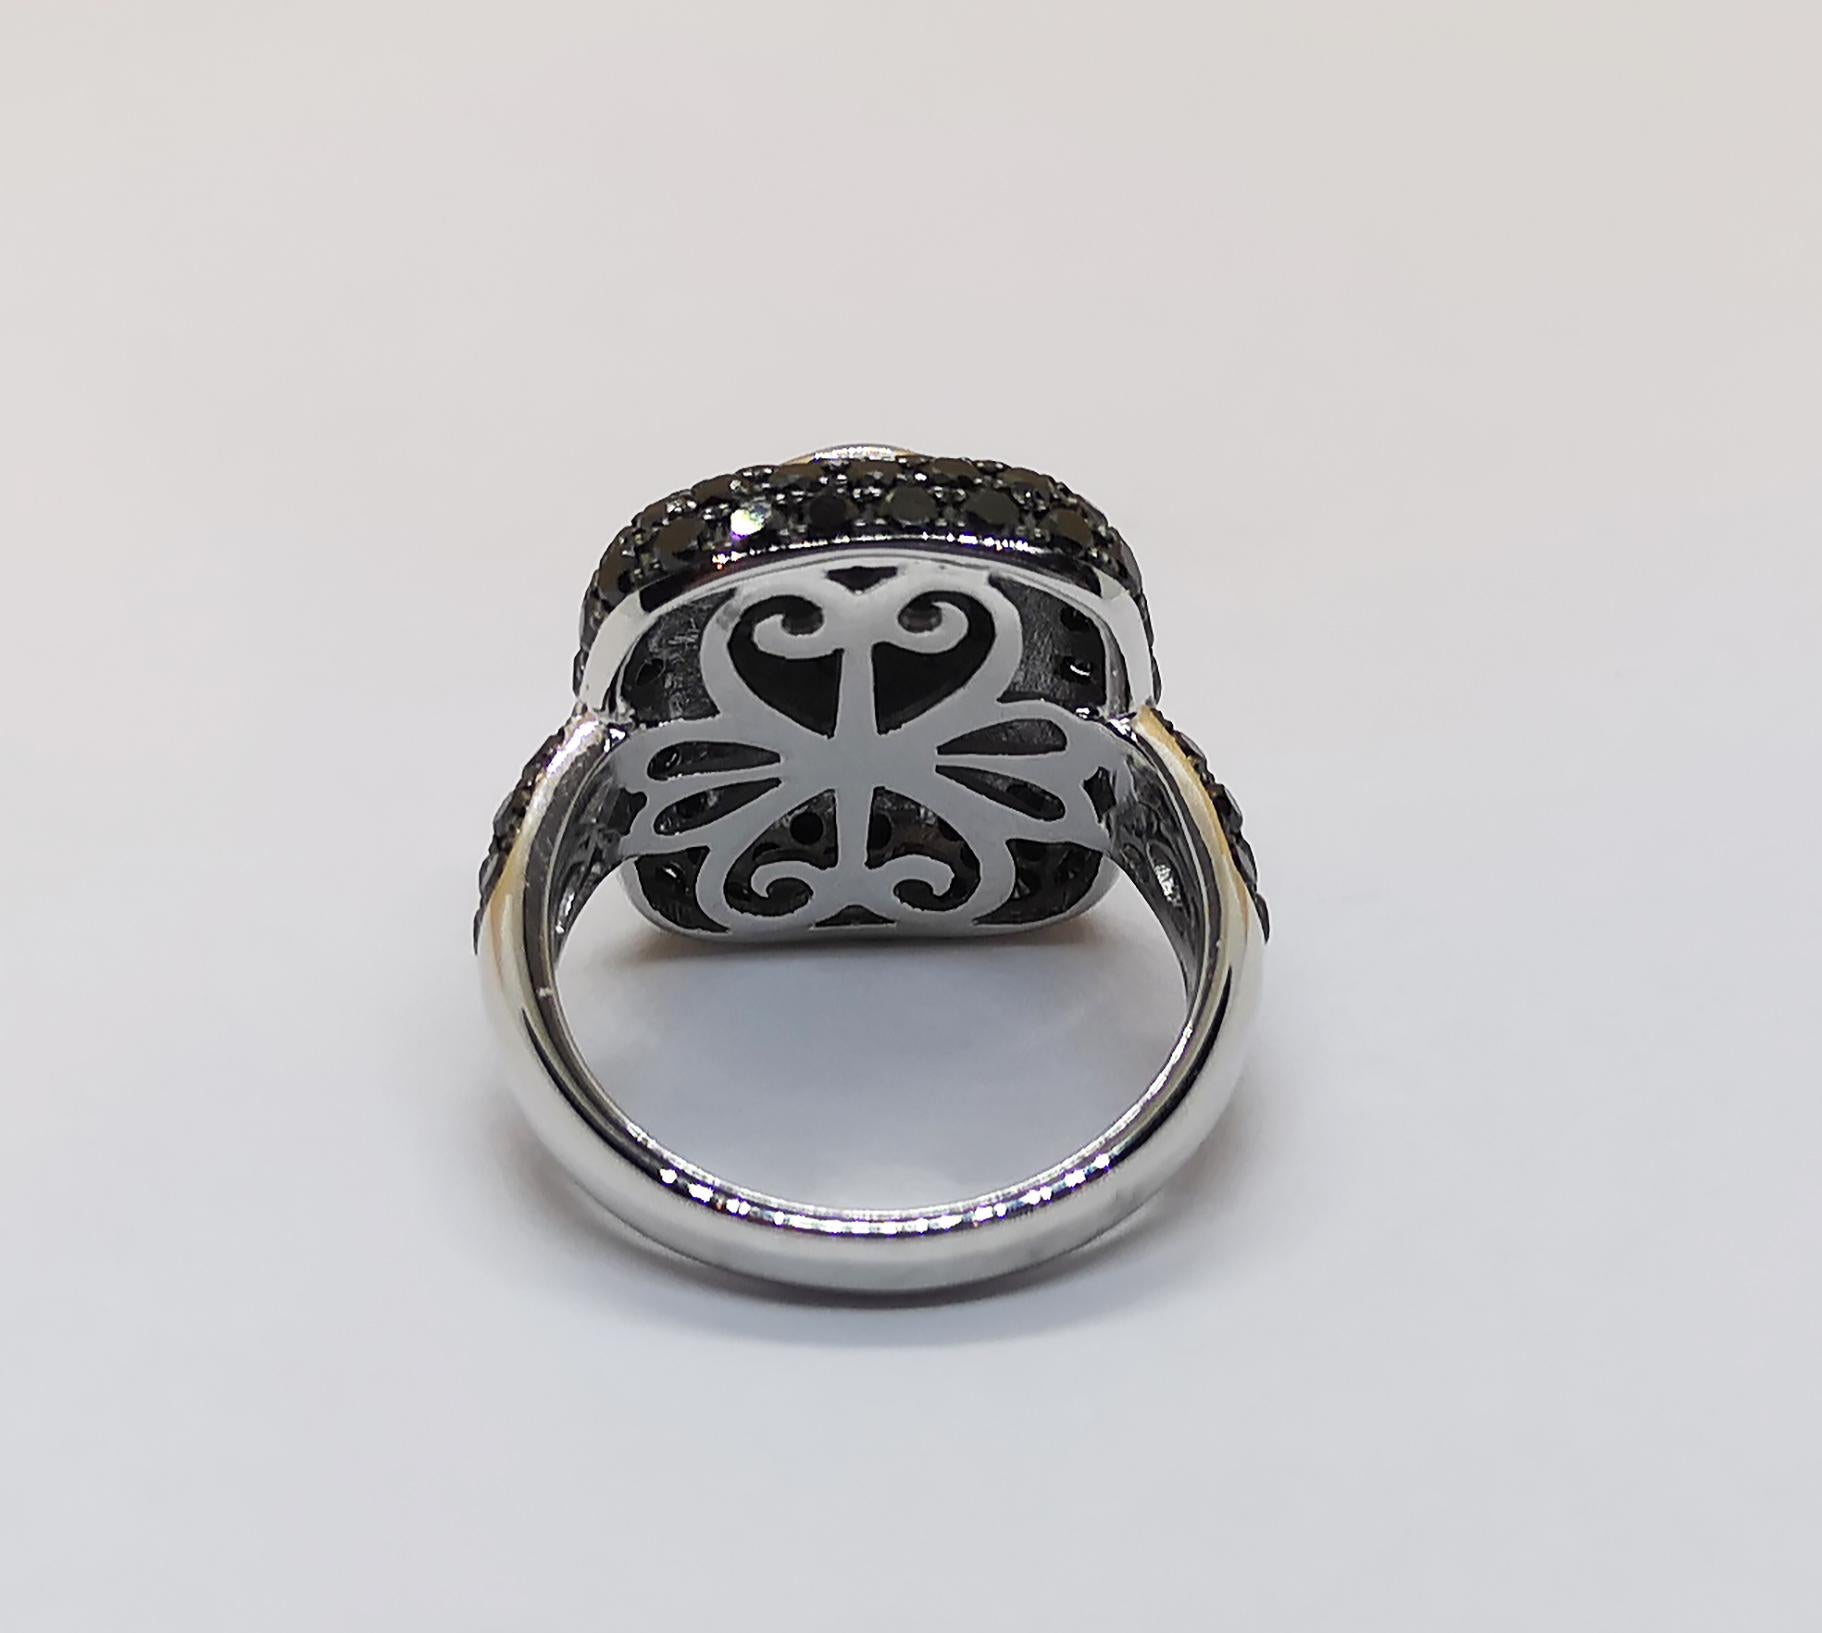 Black Star Sapphire 6.44 carats with Black Diamond 2.69 carats Ring set in 18 Karat White Gold Settings 


Width: 2.0 cm
Length: 2.3 cm 
Ring Size: 56

